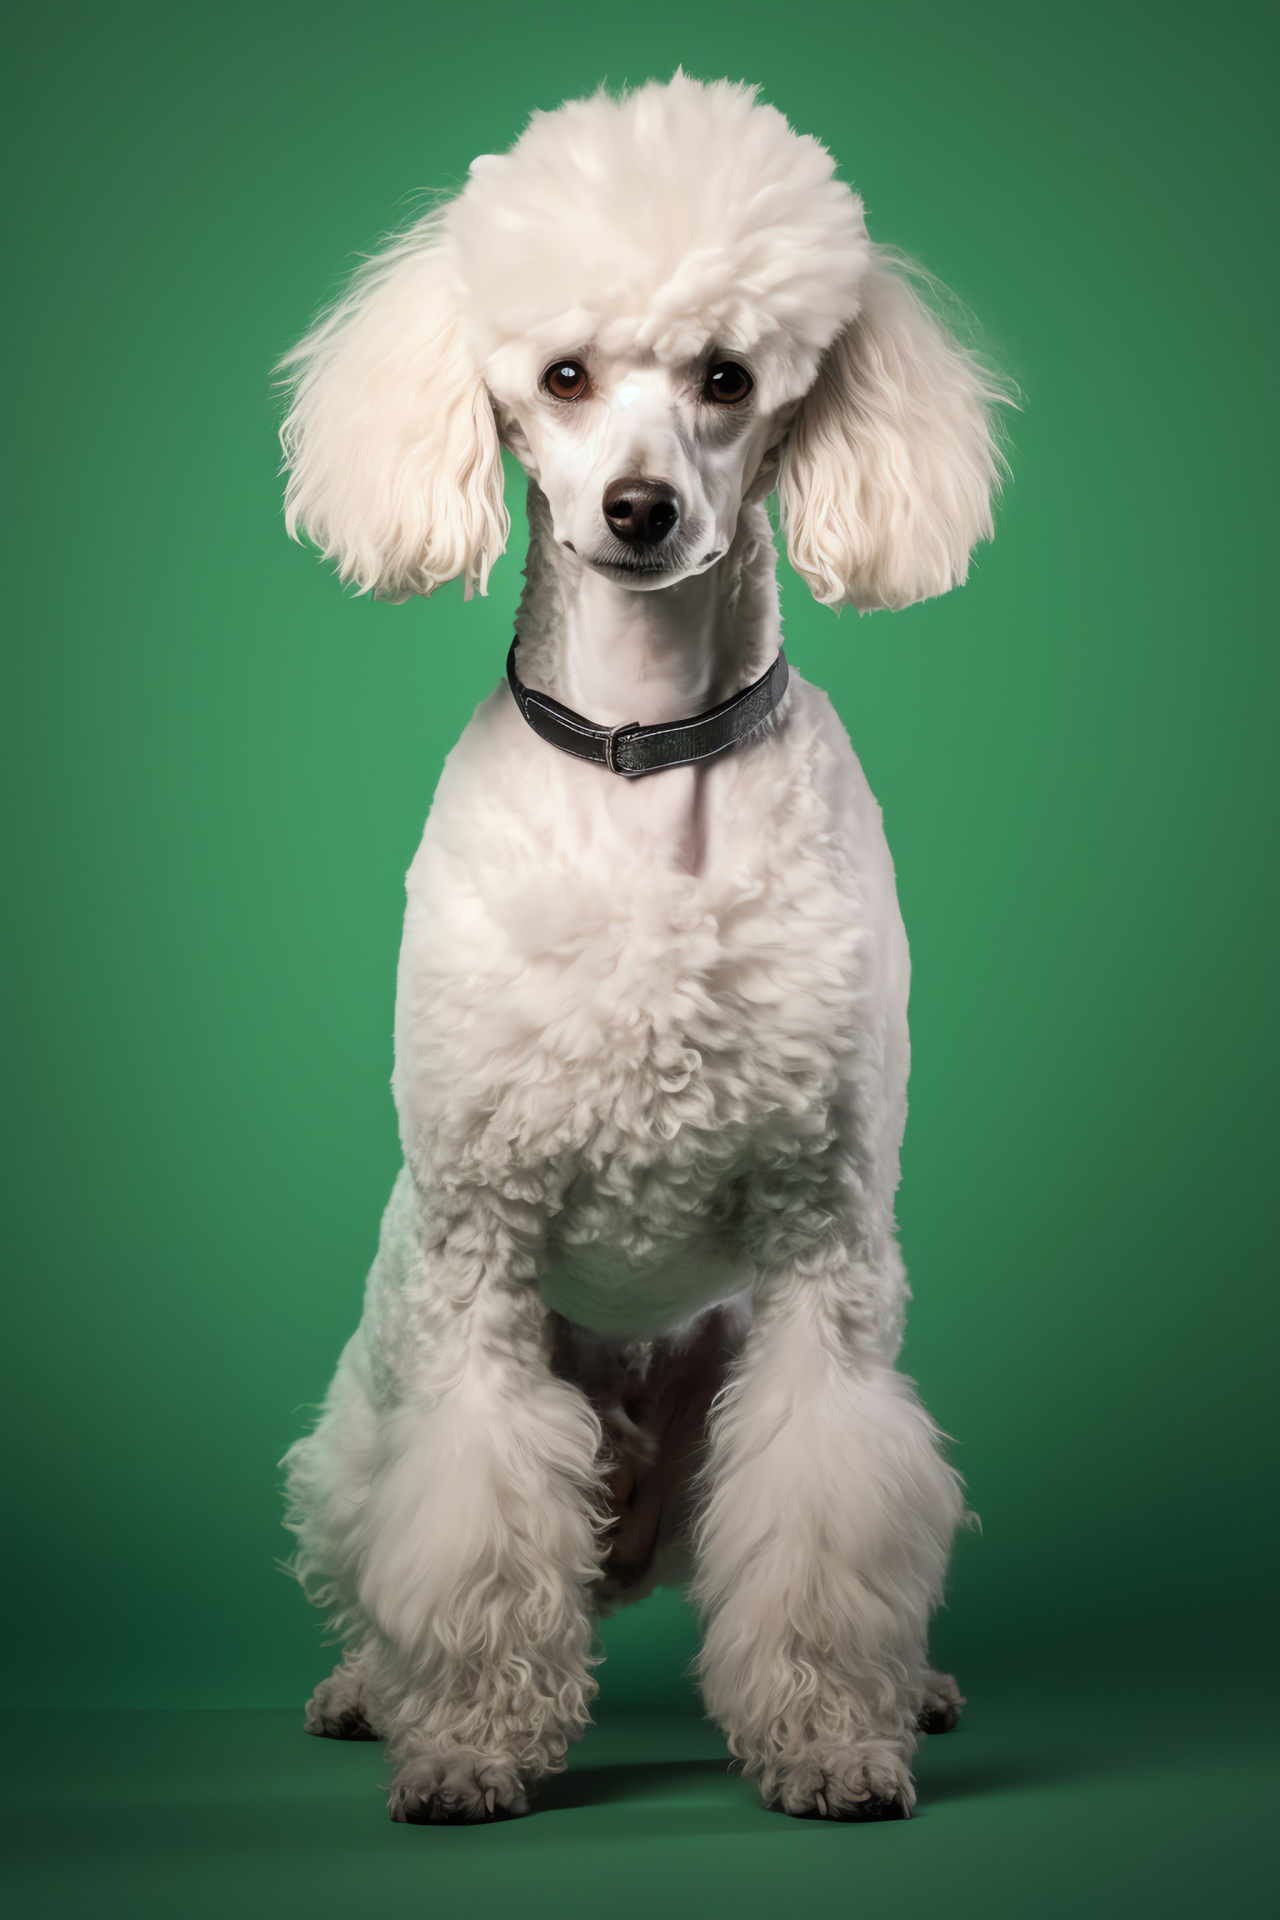 Statuesque cream Poodle, fluffy coat, verdant-eyed, posed against two-toned backdrop, HD Phone Wallpaper